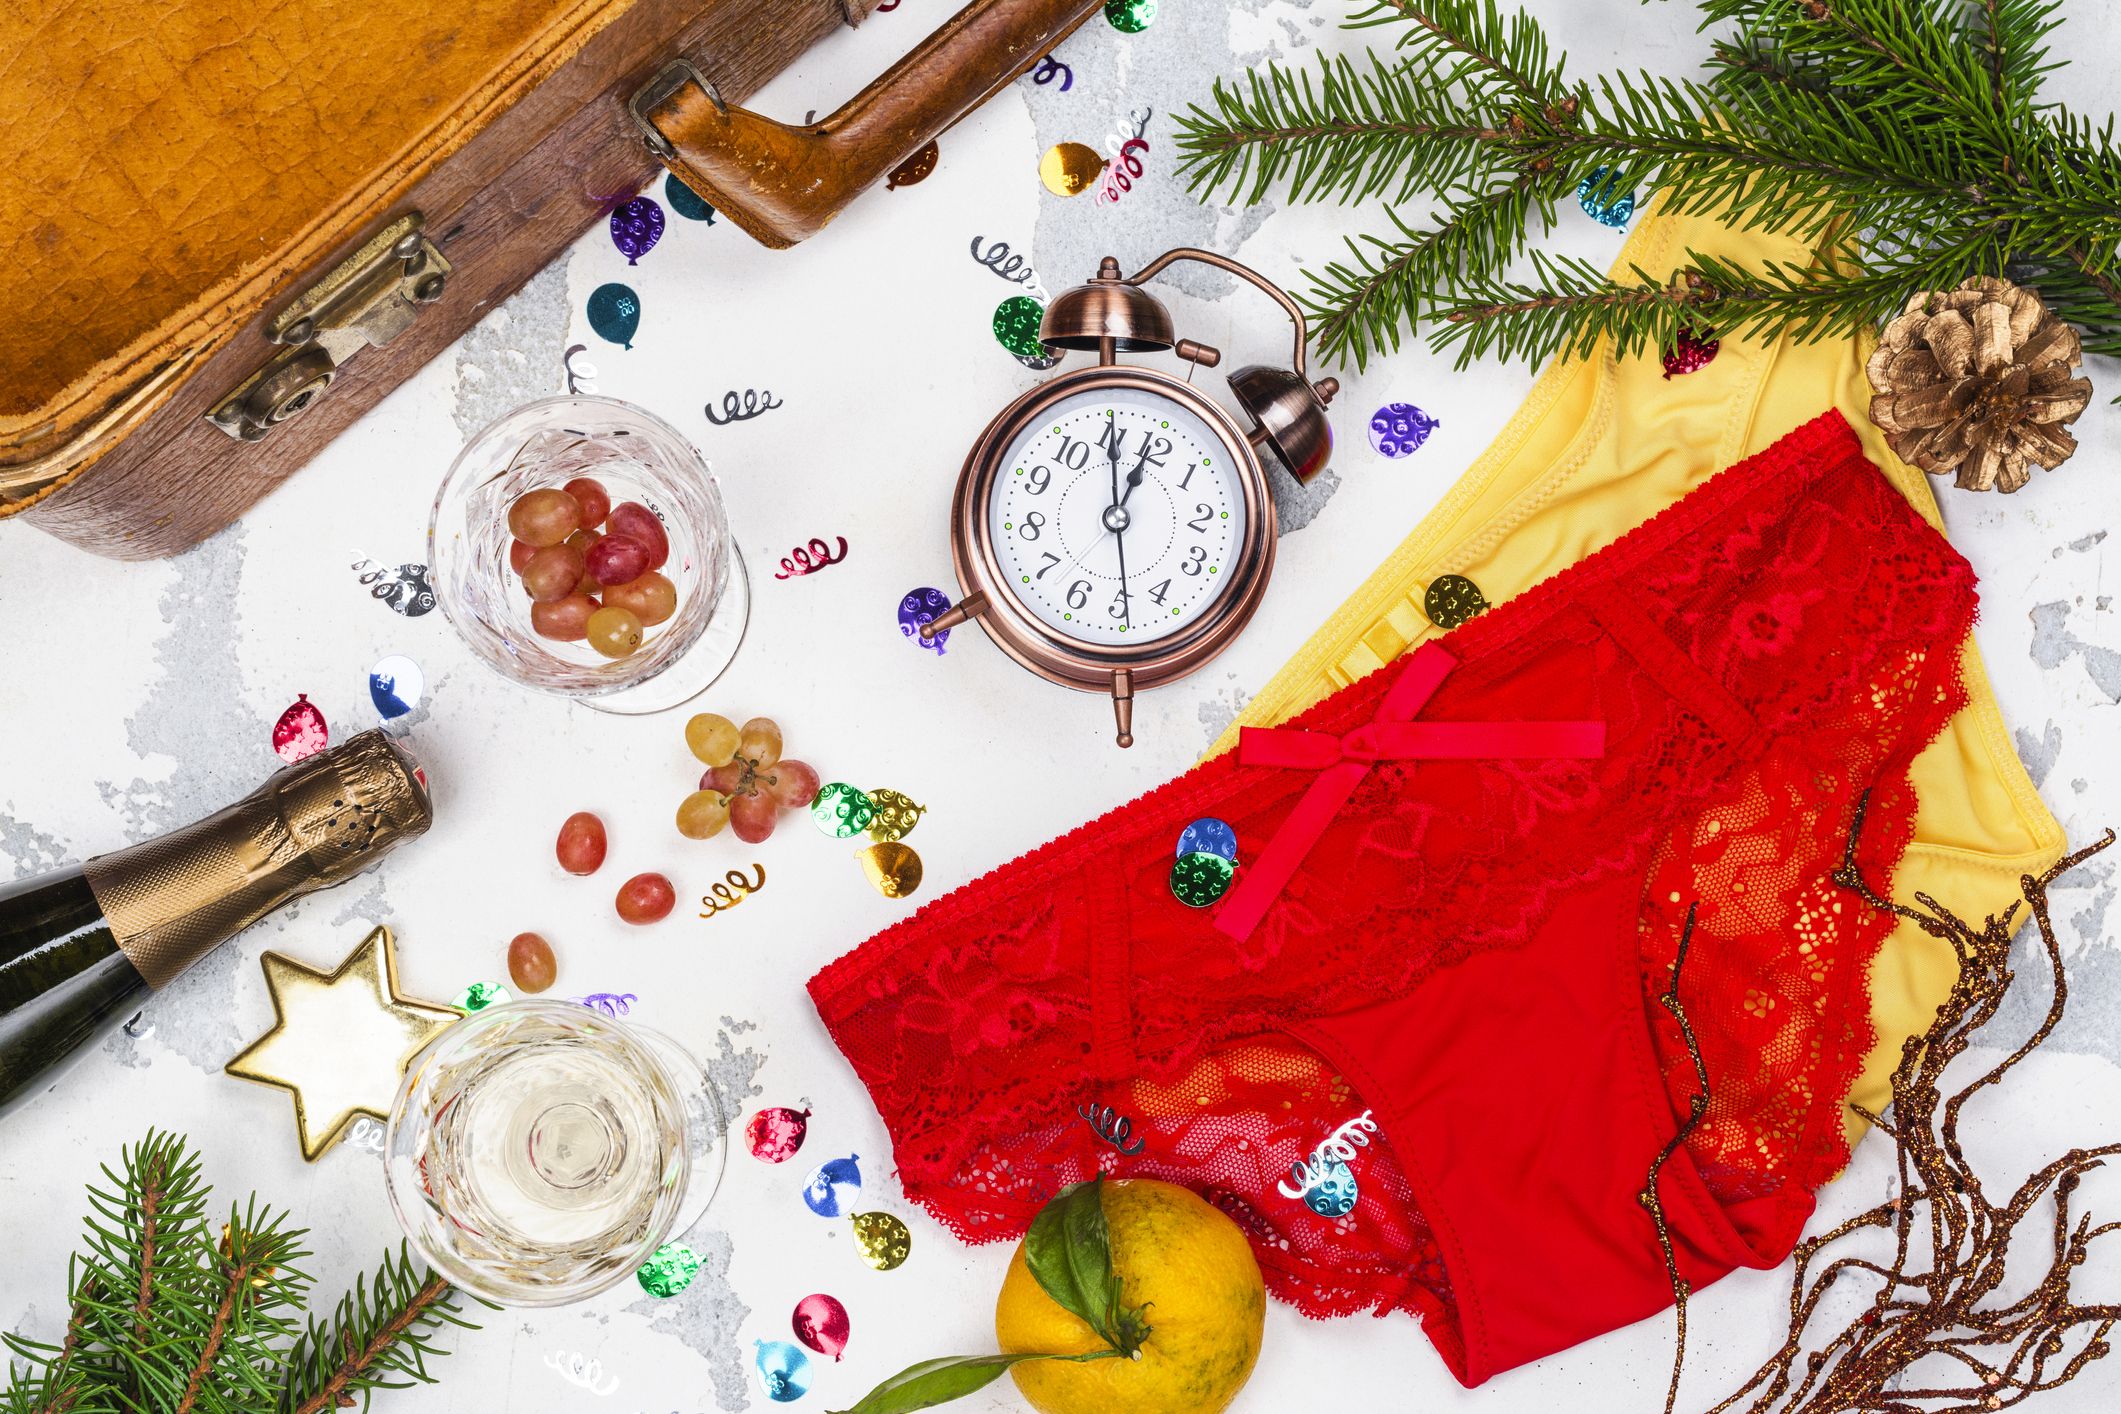 In Italy, wearing red underwear on New Year's Eve is a popular